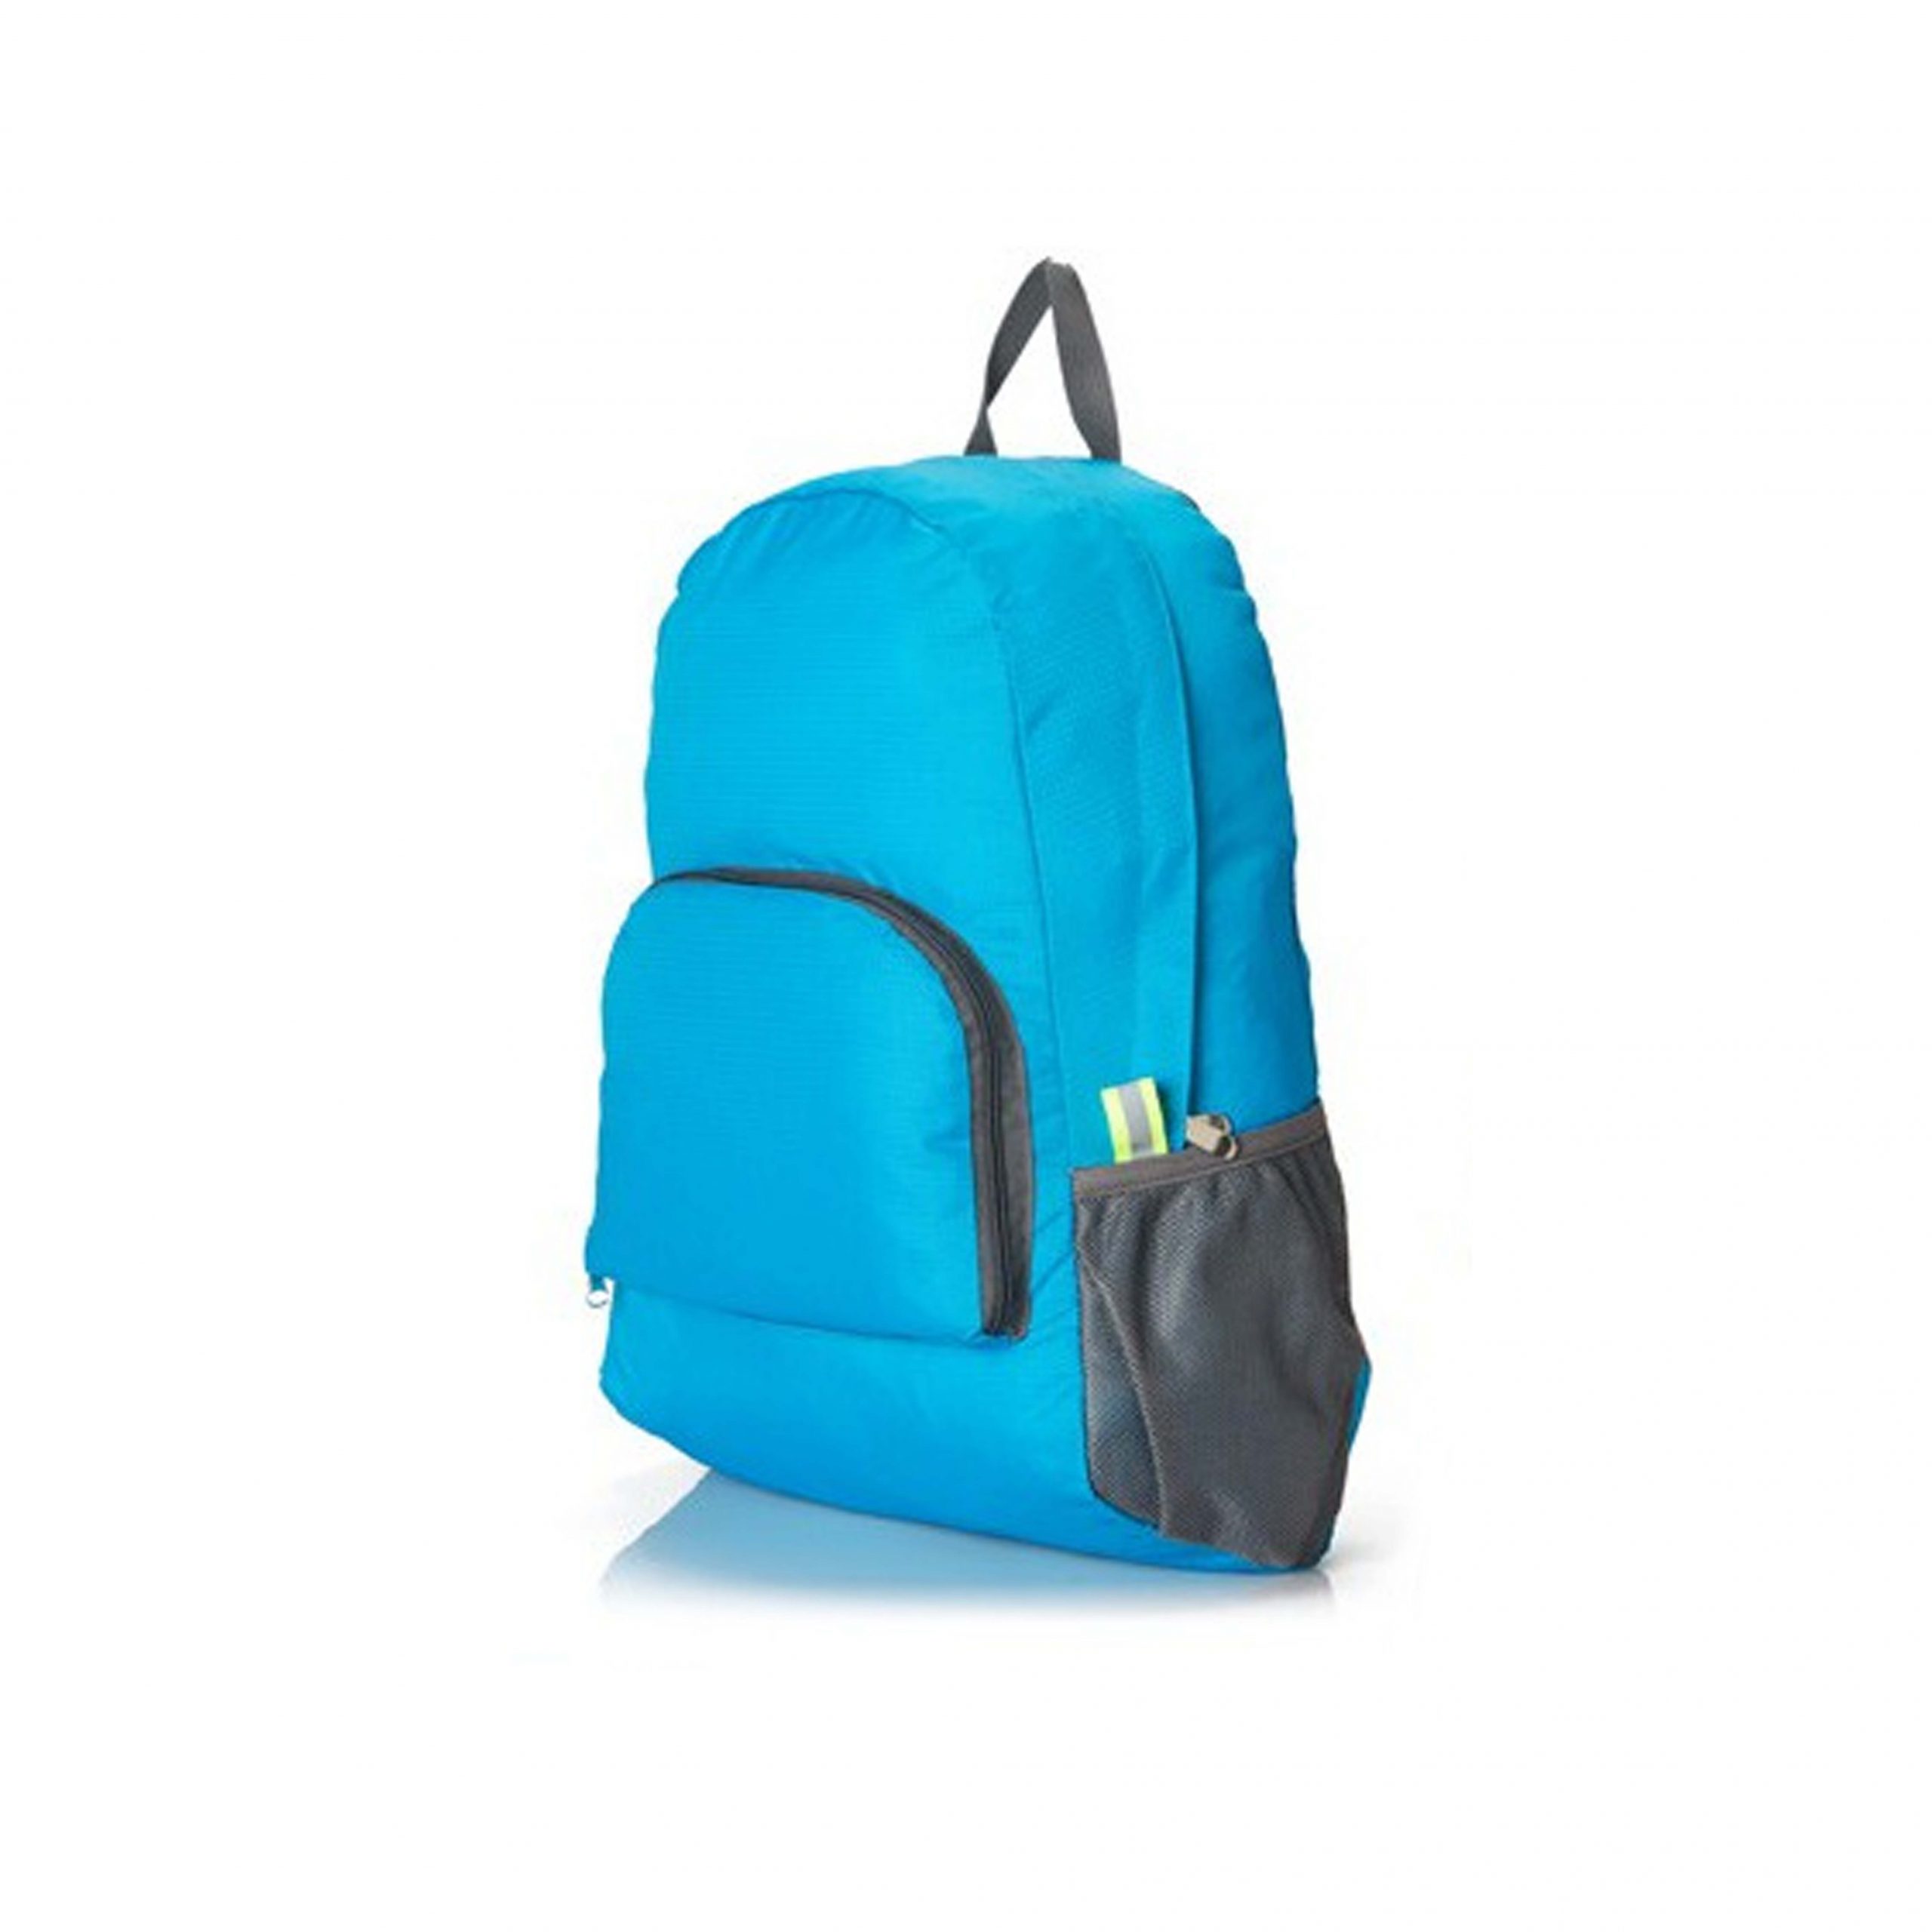 FG-438 Ribstop Nylon Foldable Backpack - Unique, Customized Corporate Gifts